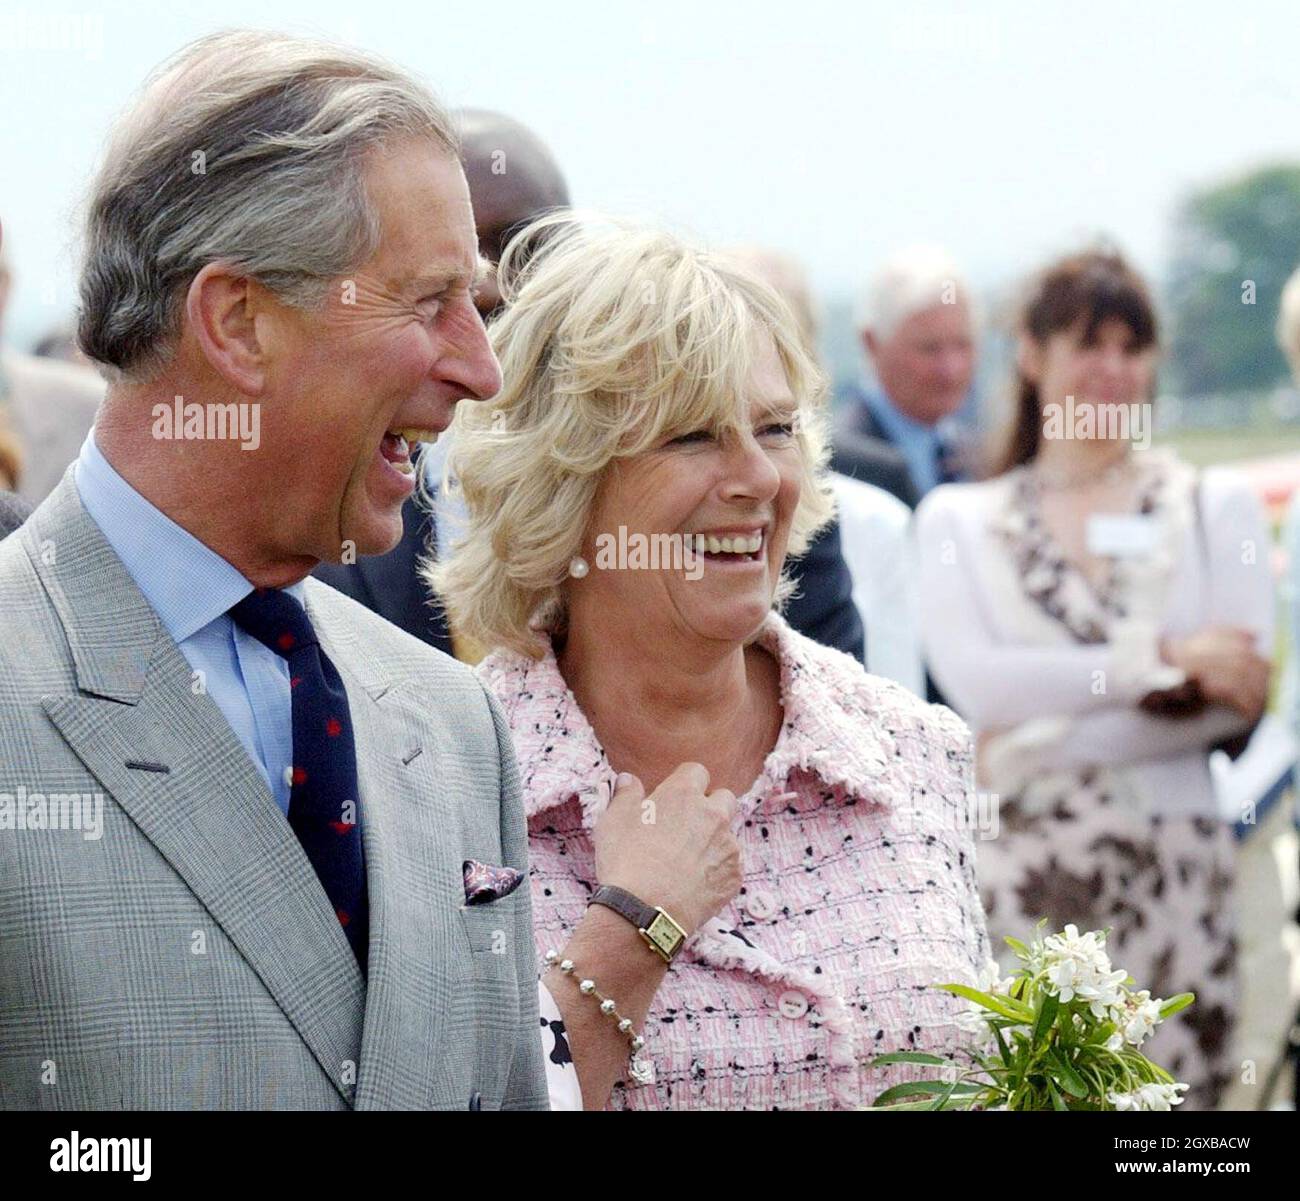 Prince Charles and Camilla Duchess of Cornwall during their visit to Kemble Airfield in Gloucestershire. Anwar Hussein/allactiondigital.com  Stock Photo